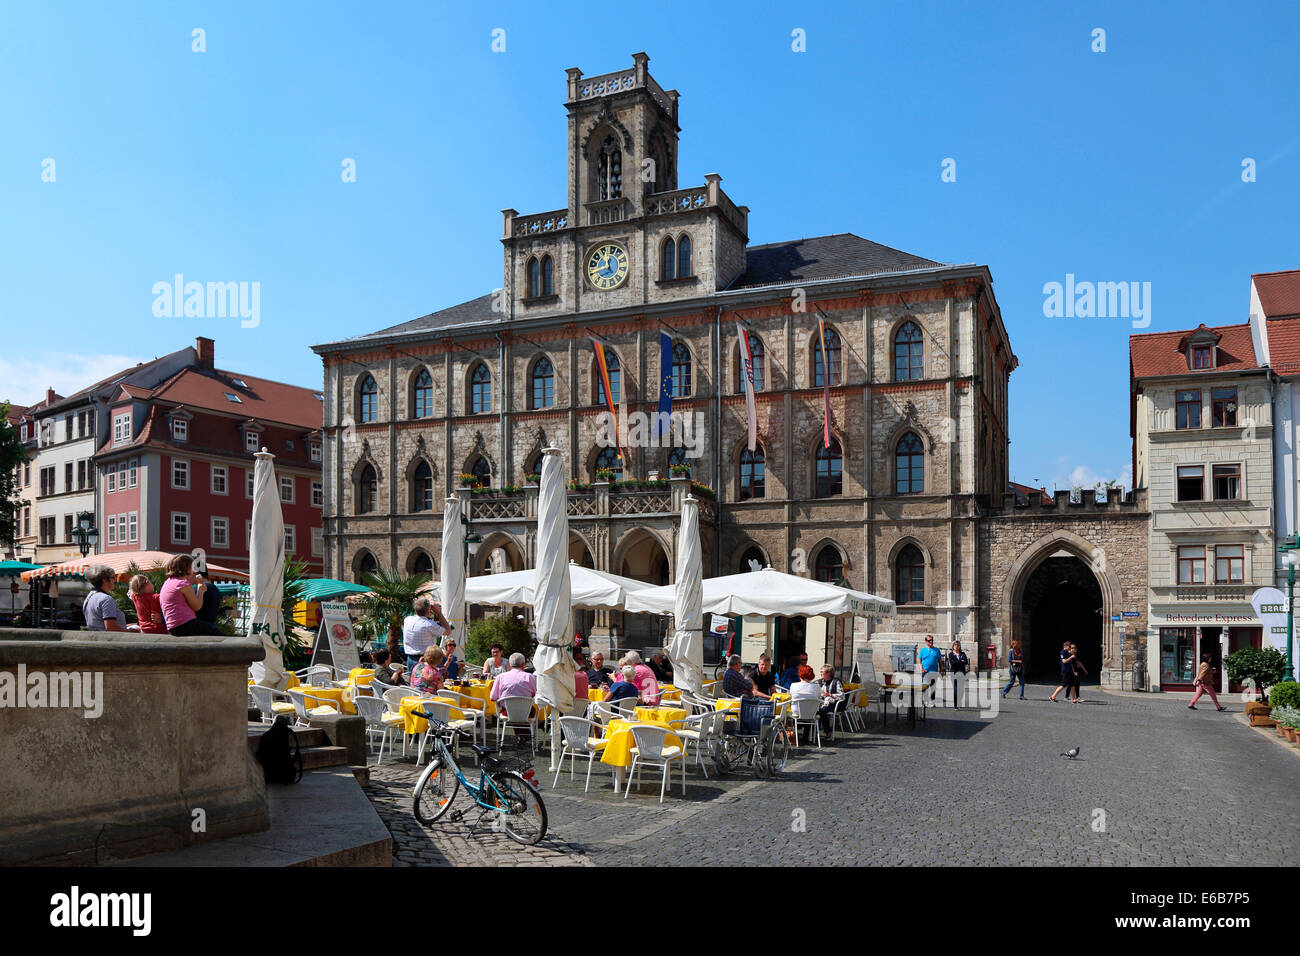 Weimar Thuringia old town hall market market place Stock Photo